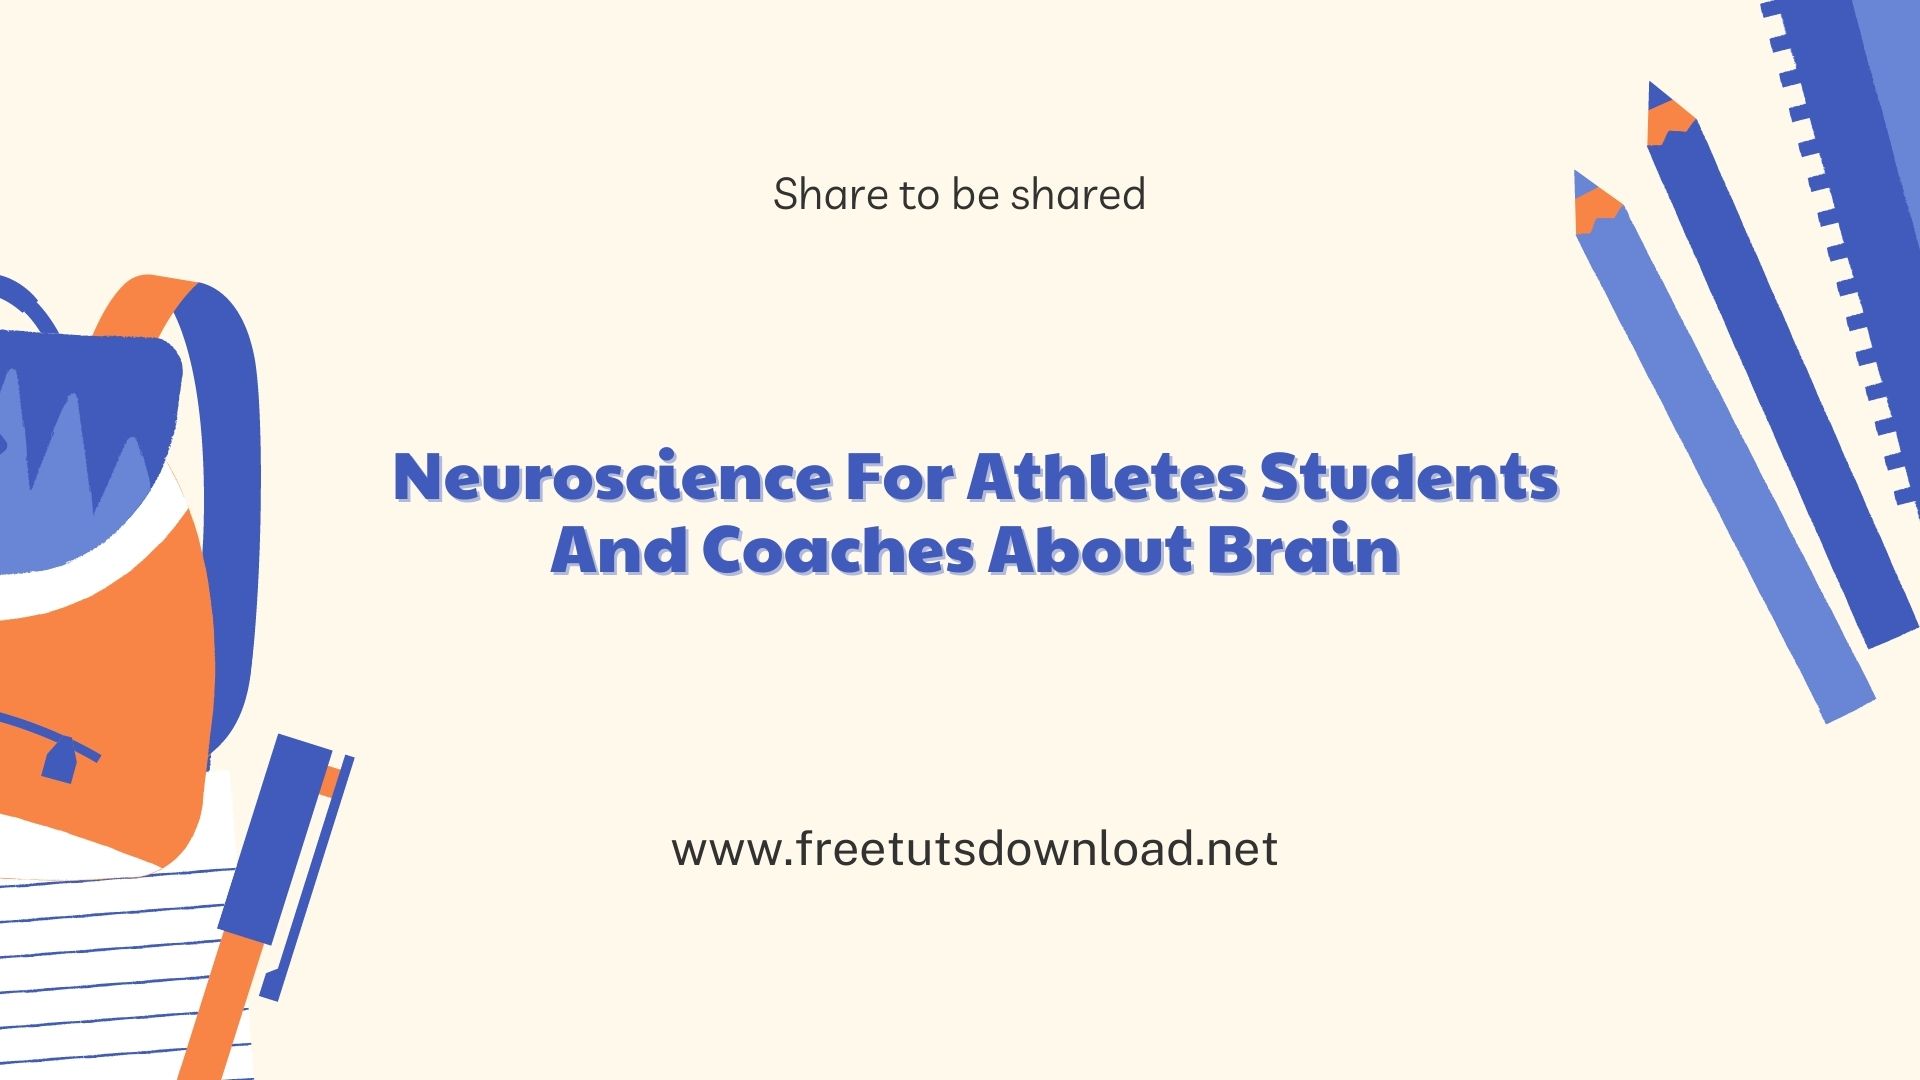 Neuroscience For Athletes Students And Coaches About Brain